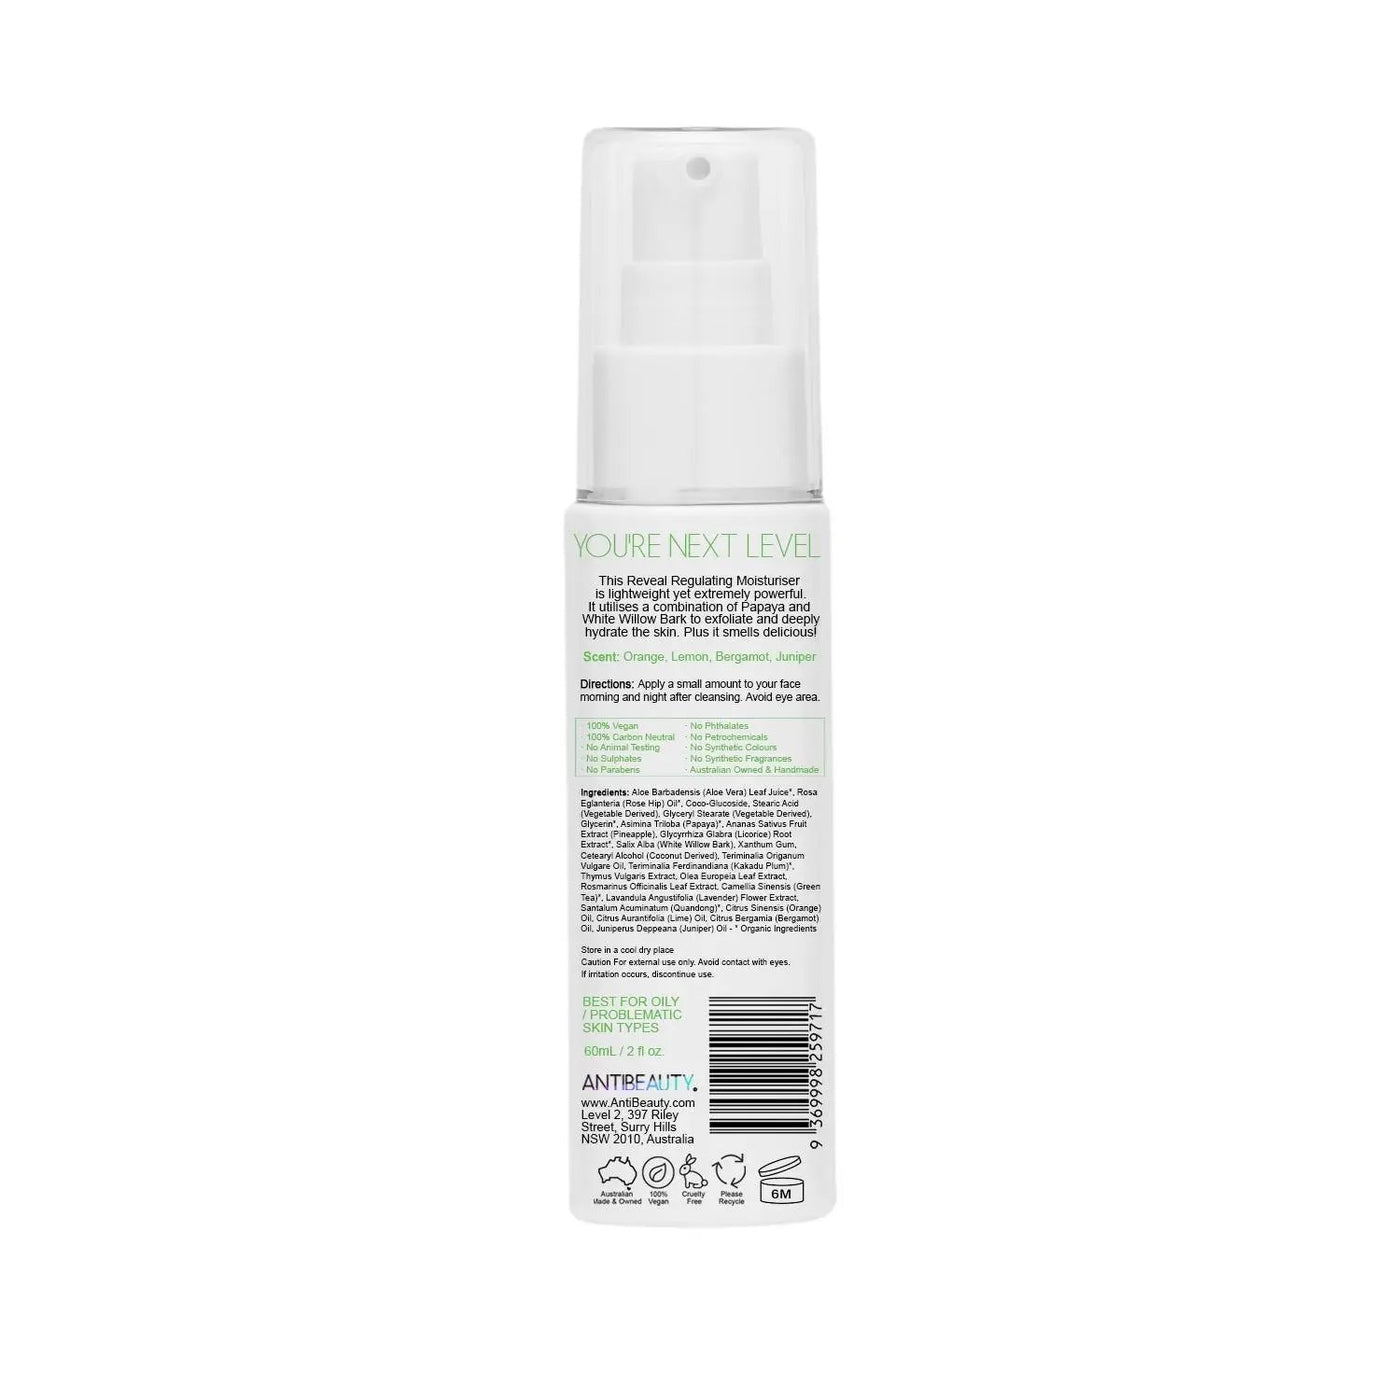 Back label of AntiBeauty Reveal Regulating Moisturizer bottle on white background, featuring product details and ingredients list.